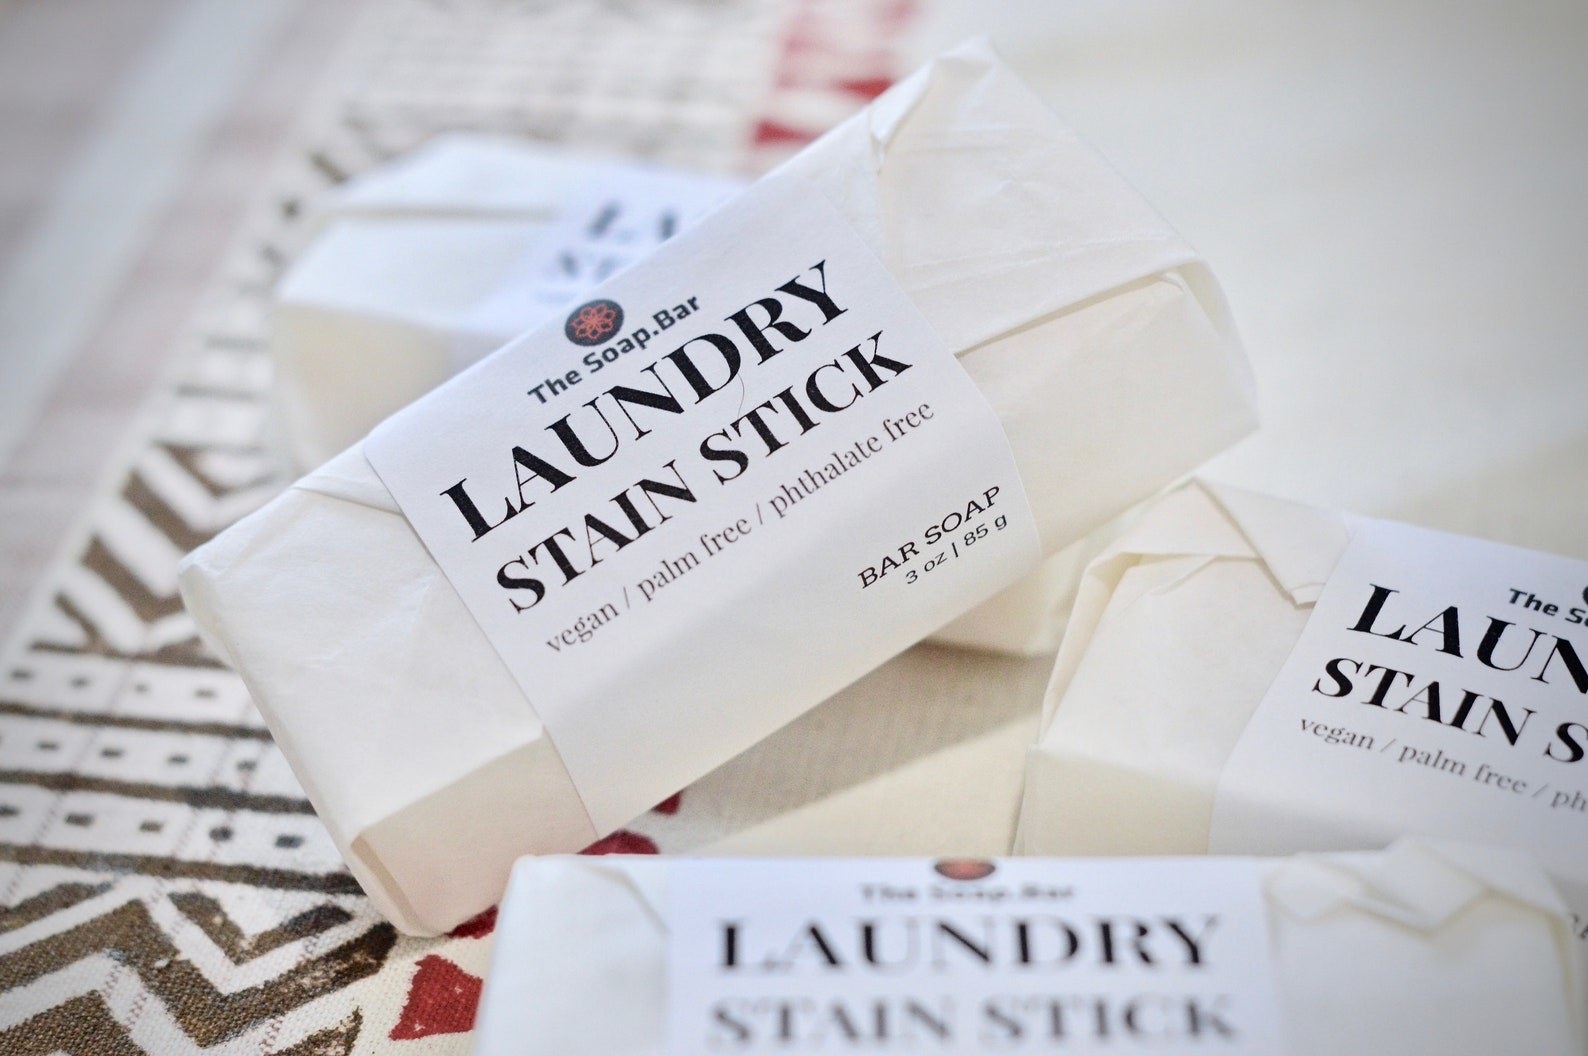 vegan laundry stain sticks wrapped in white paper on table